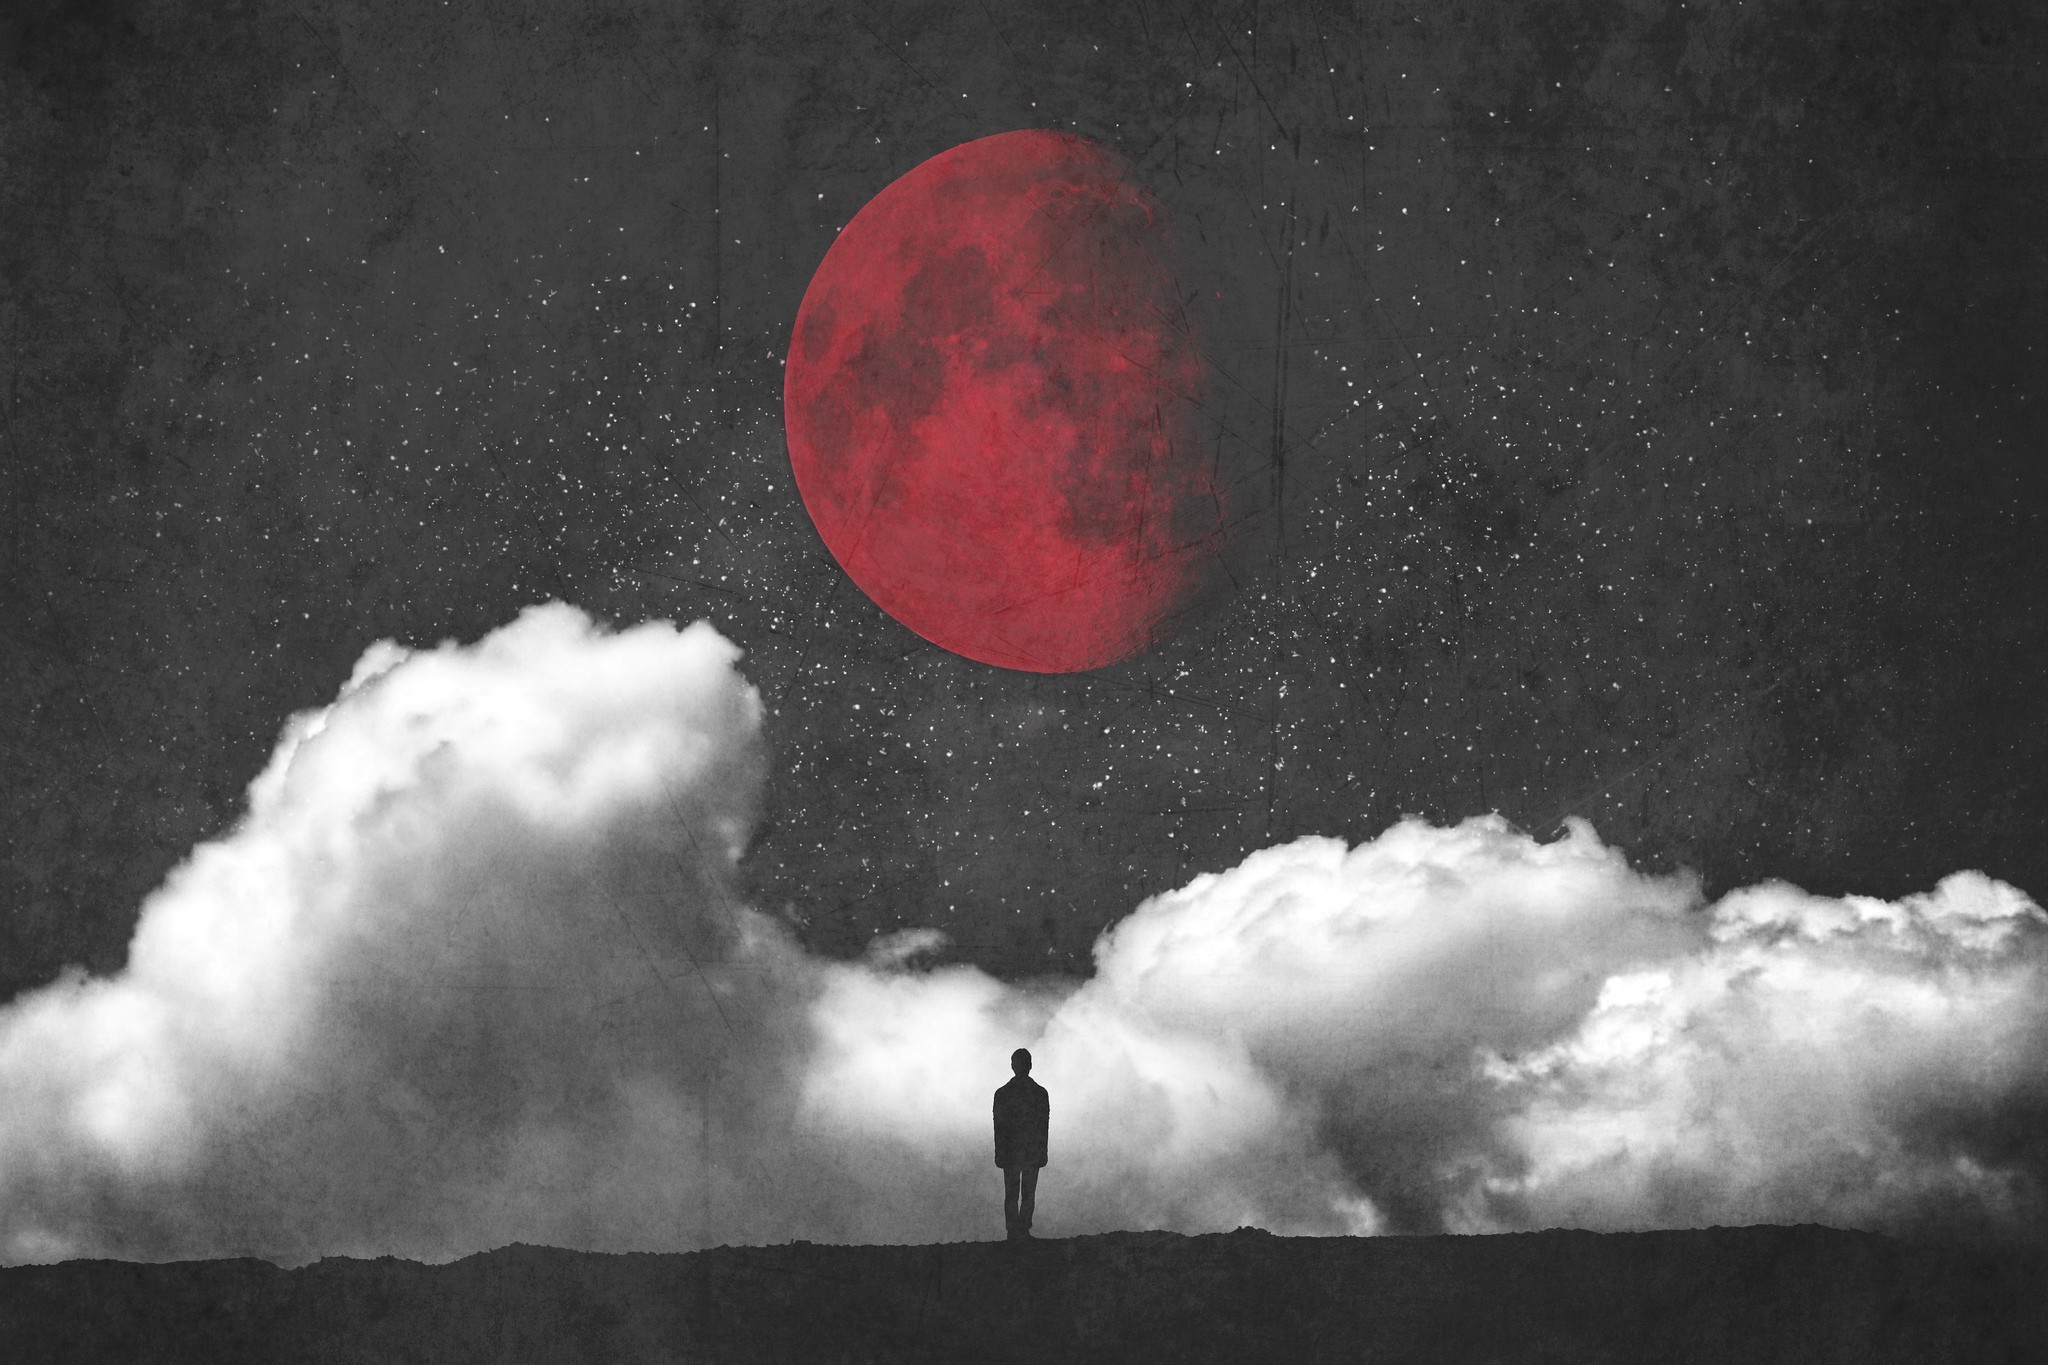 fantasy Art, Red Moon, Moon, Clouds, Minimalism, Silhouette Wallpapers